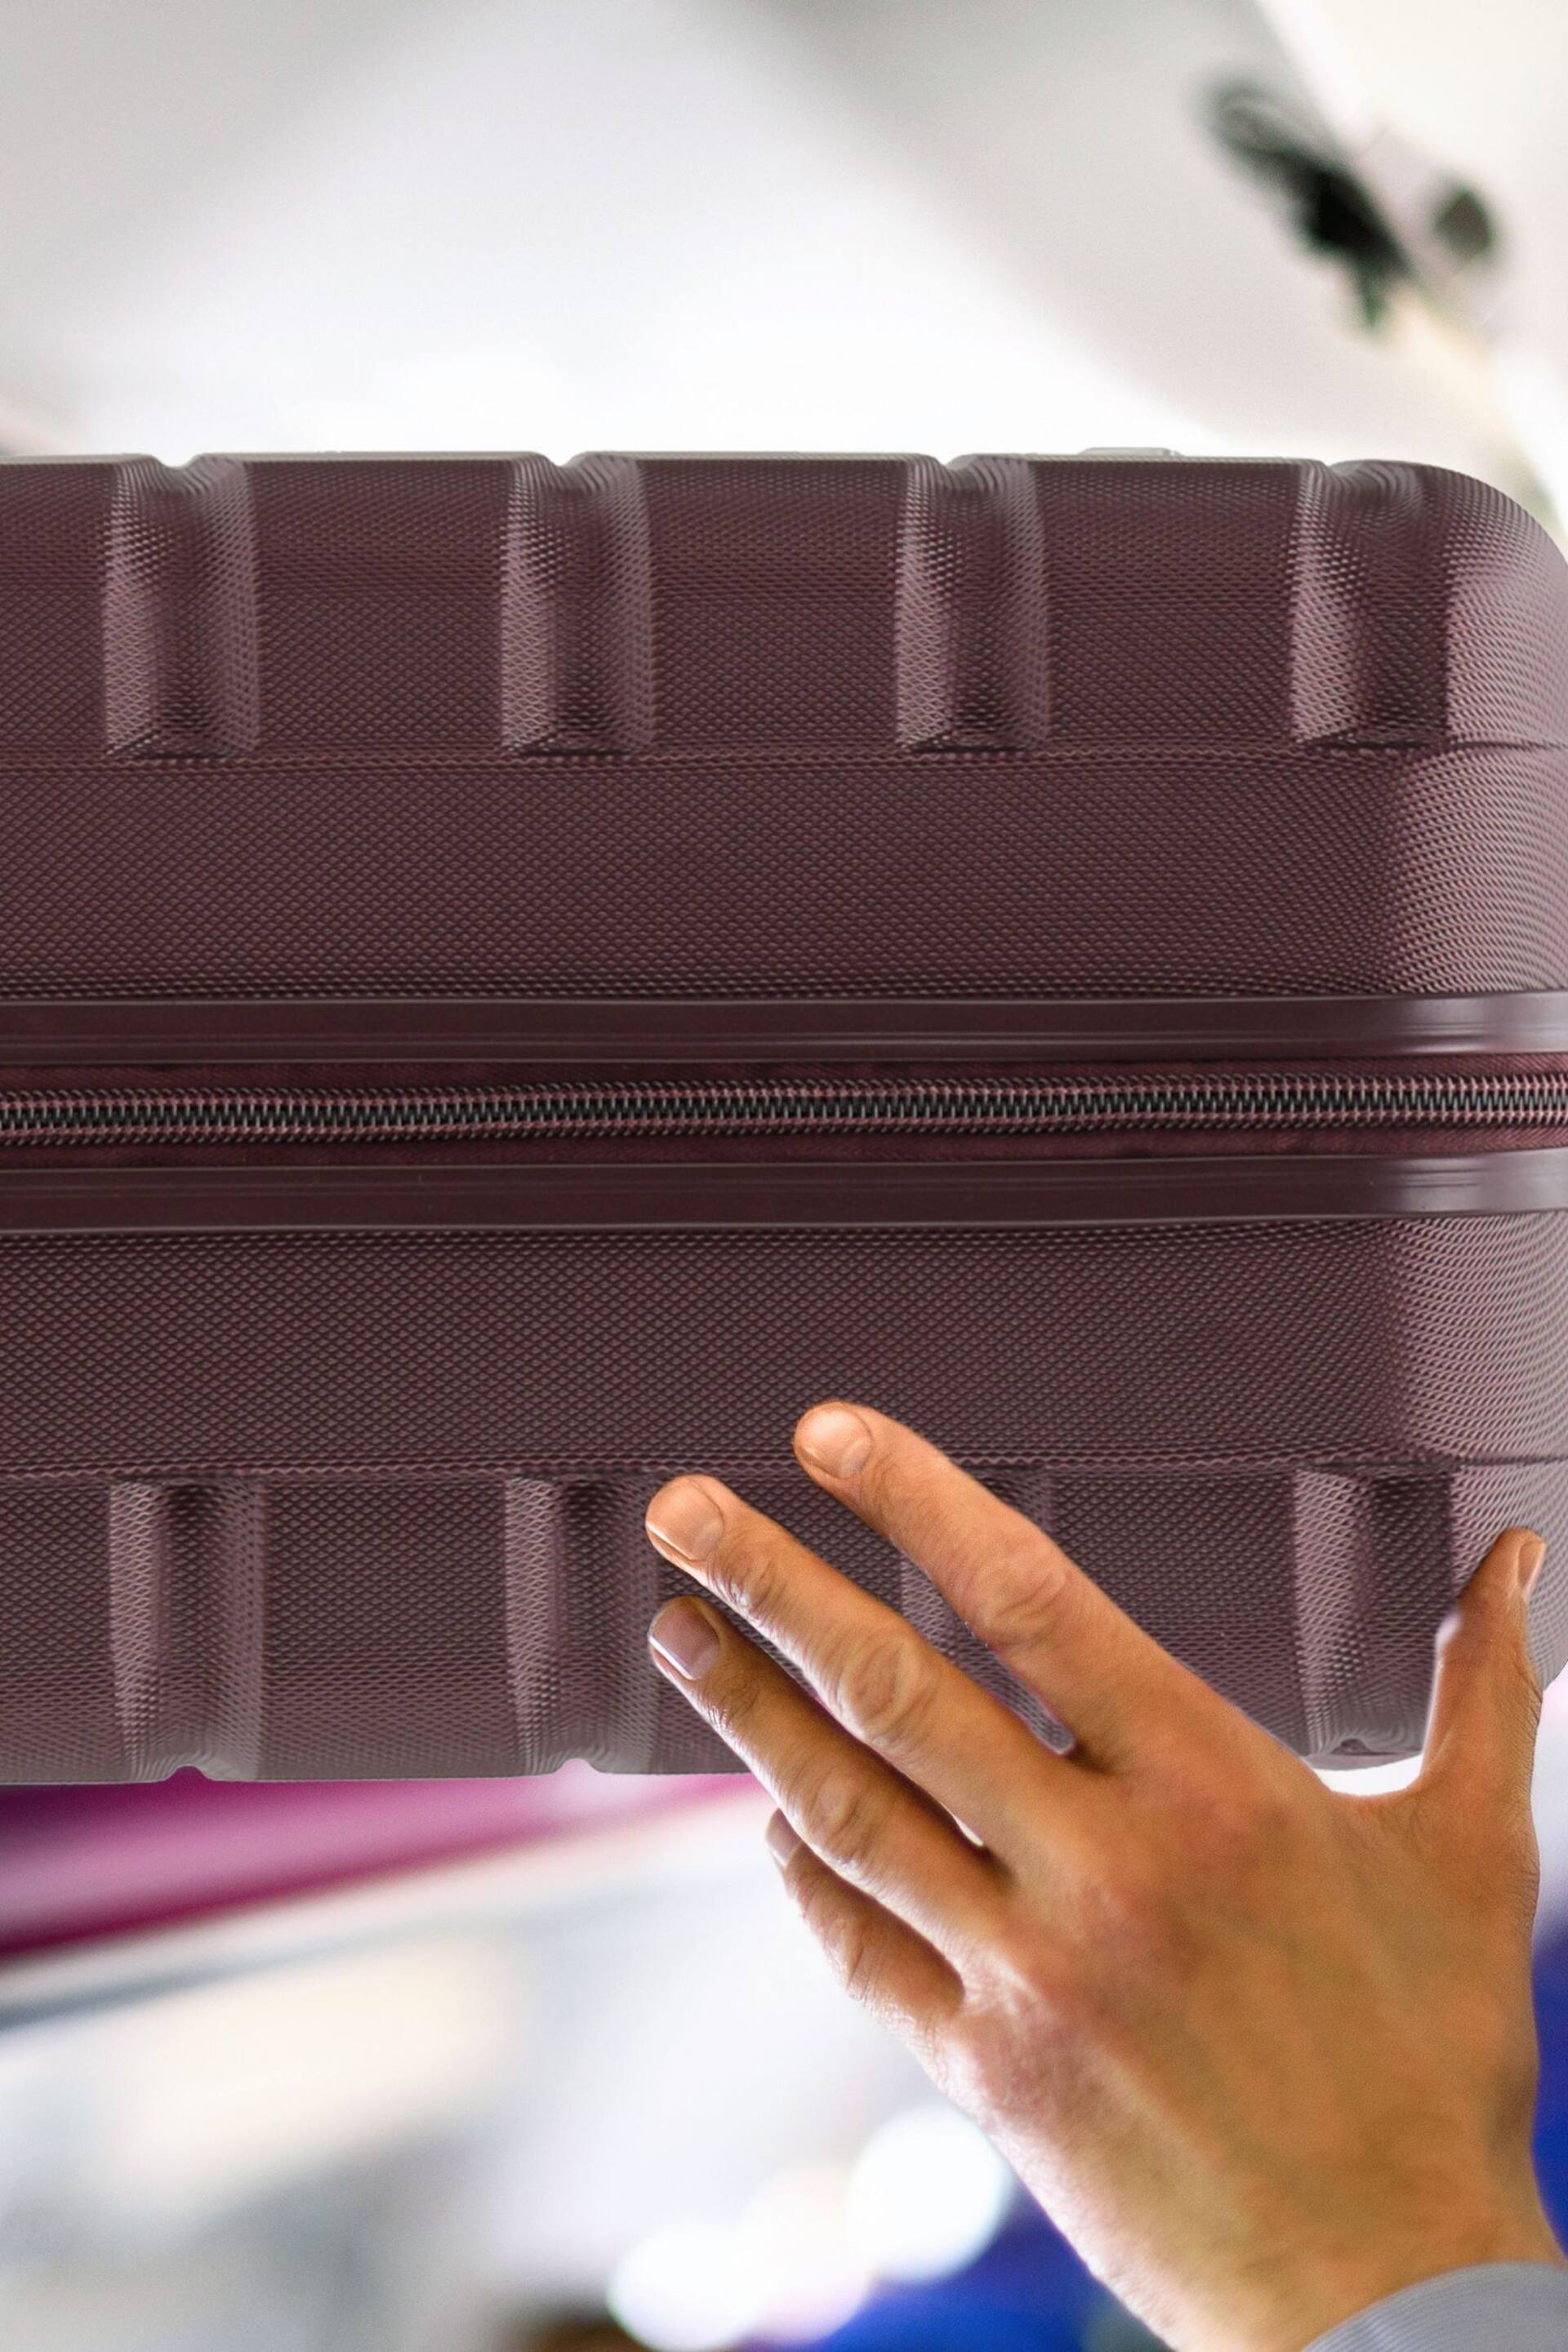 Flight Knight Burgundy + Burgundy EasyJet 56x45x25cm Overhead 4 Wheel ABS Hard Case Cabin Carry On Suitcase Set Of 2 - Image 5 of 8